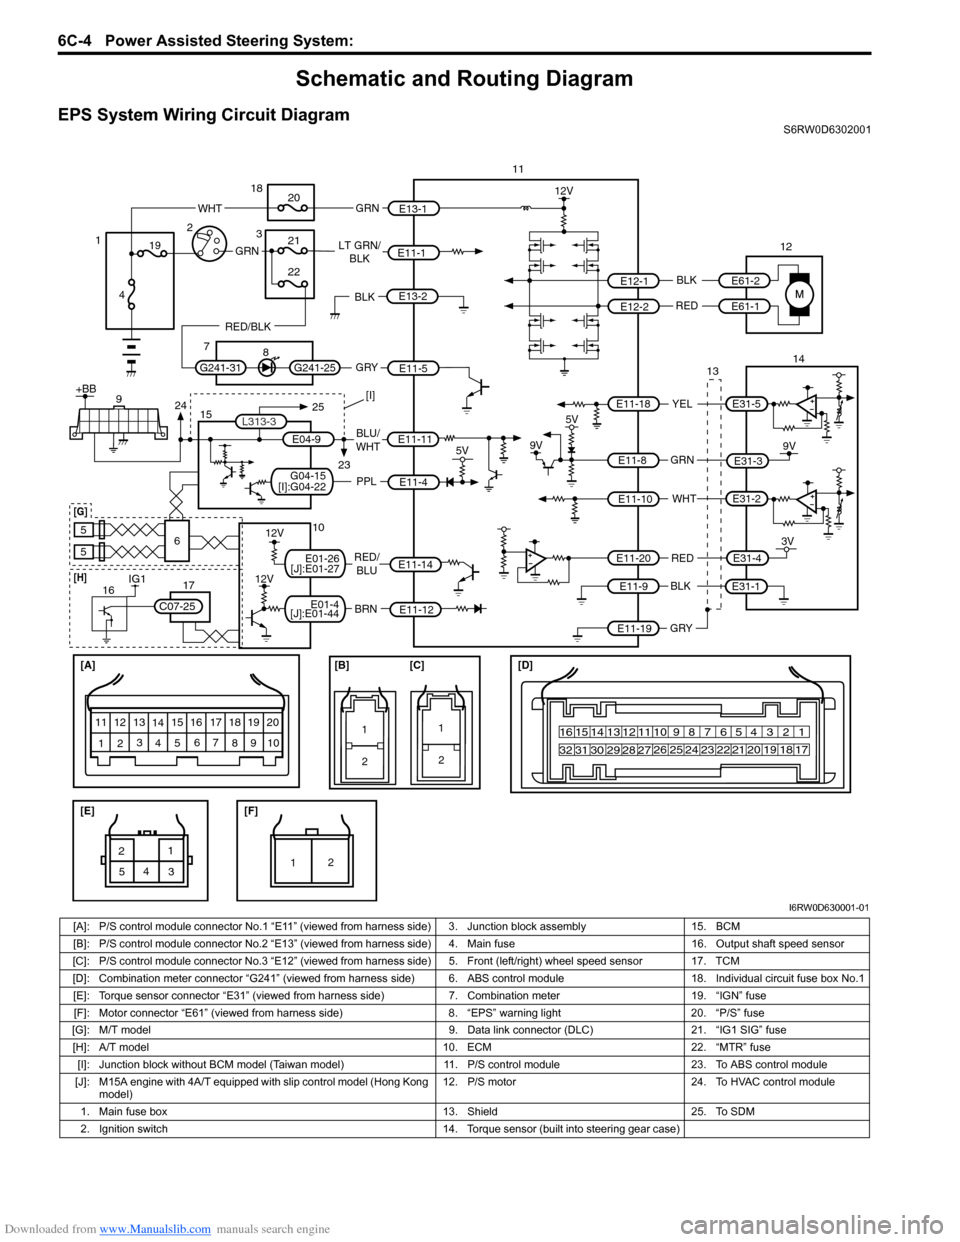 SUZUKI SX4 2006 1.G Service Workshop Manual Downloaded from www.Manualslib.com manuals search engine 6C-4 Power Assisted Steering System: 
Schematic and Routing Diagram
EPS System Wiring Circuit DiagramS6RW0D6302001
[A]
123
45
3 21
4
567
8
9 11